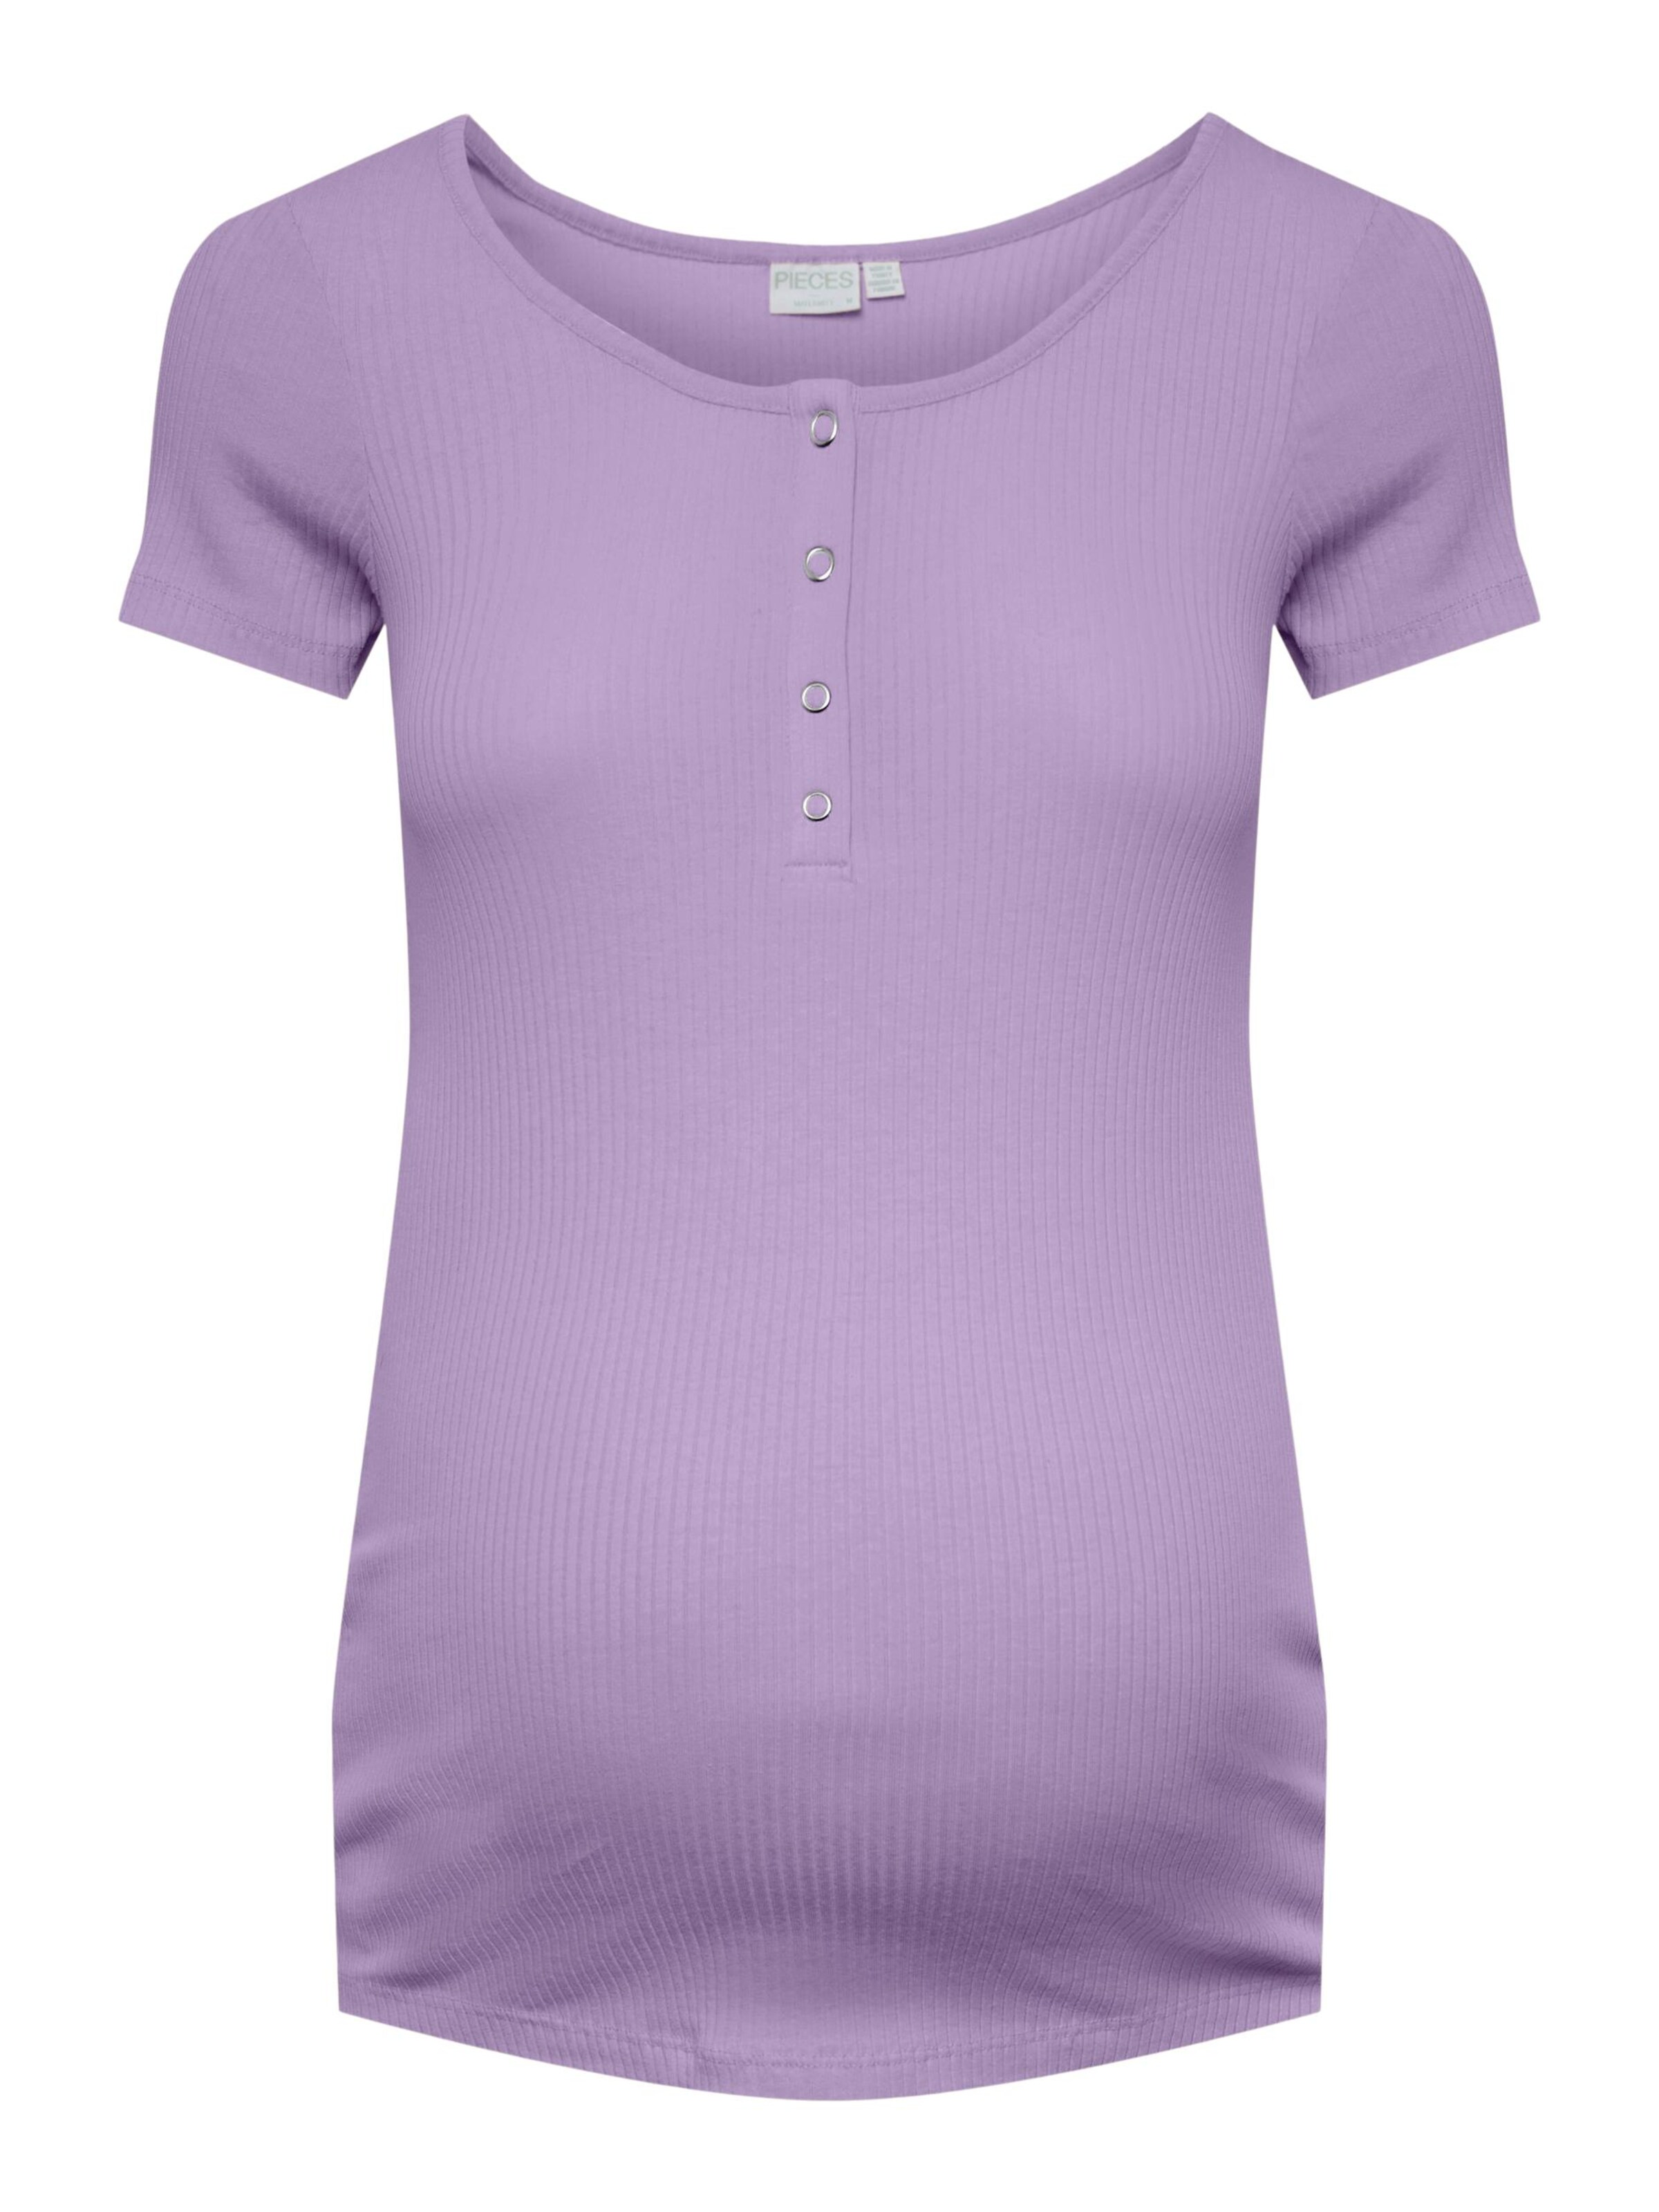 Pieces Maternity Shirt Kitte in Lavendel 